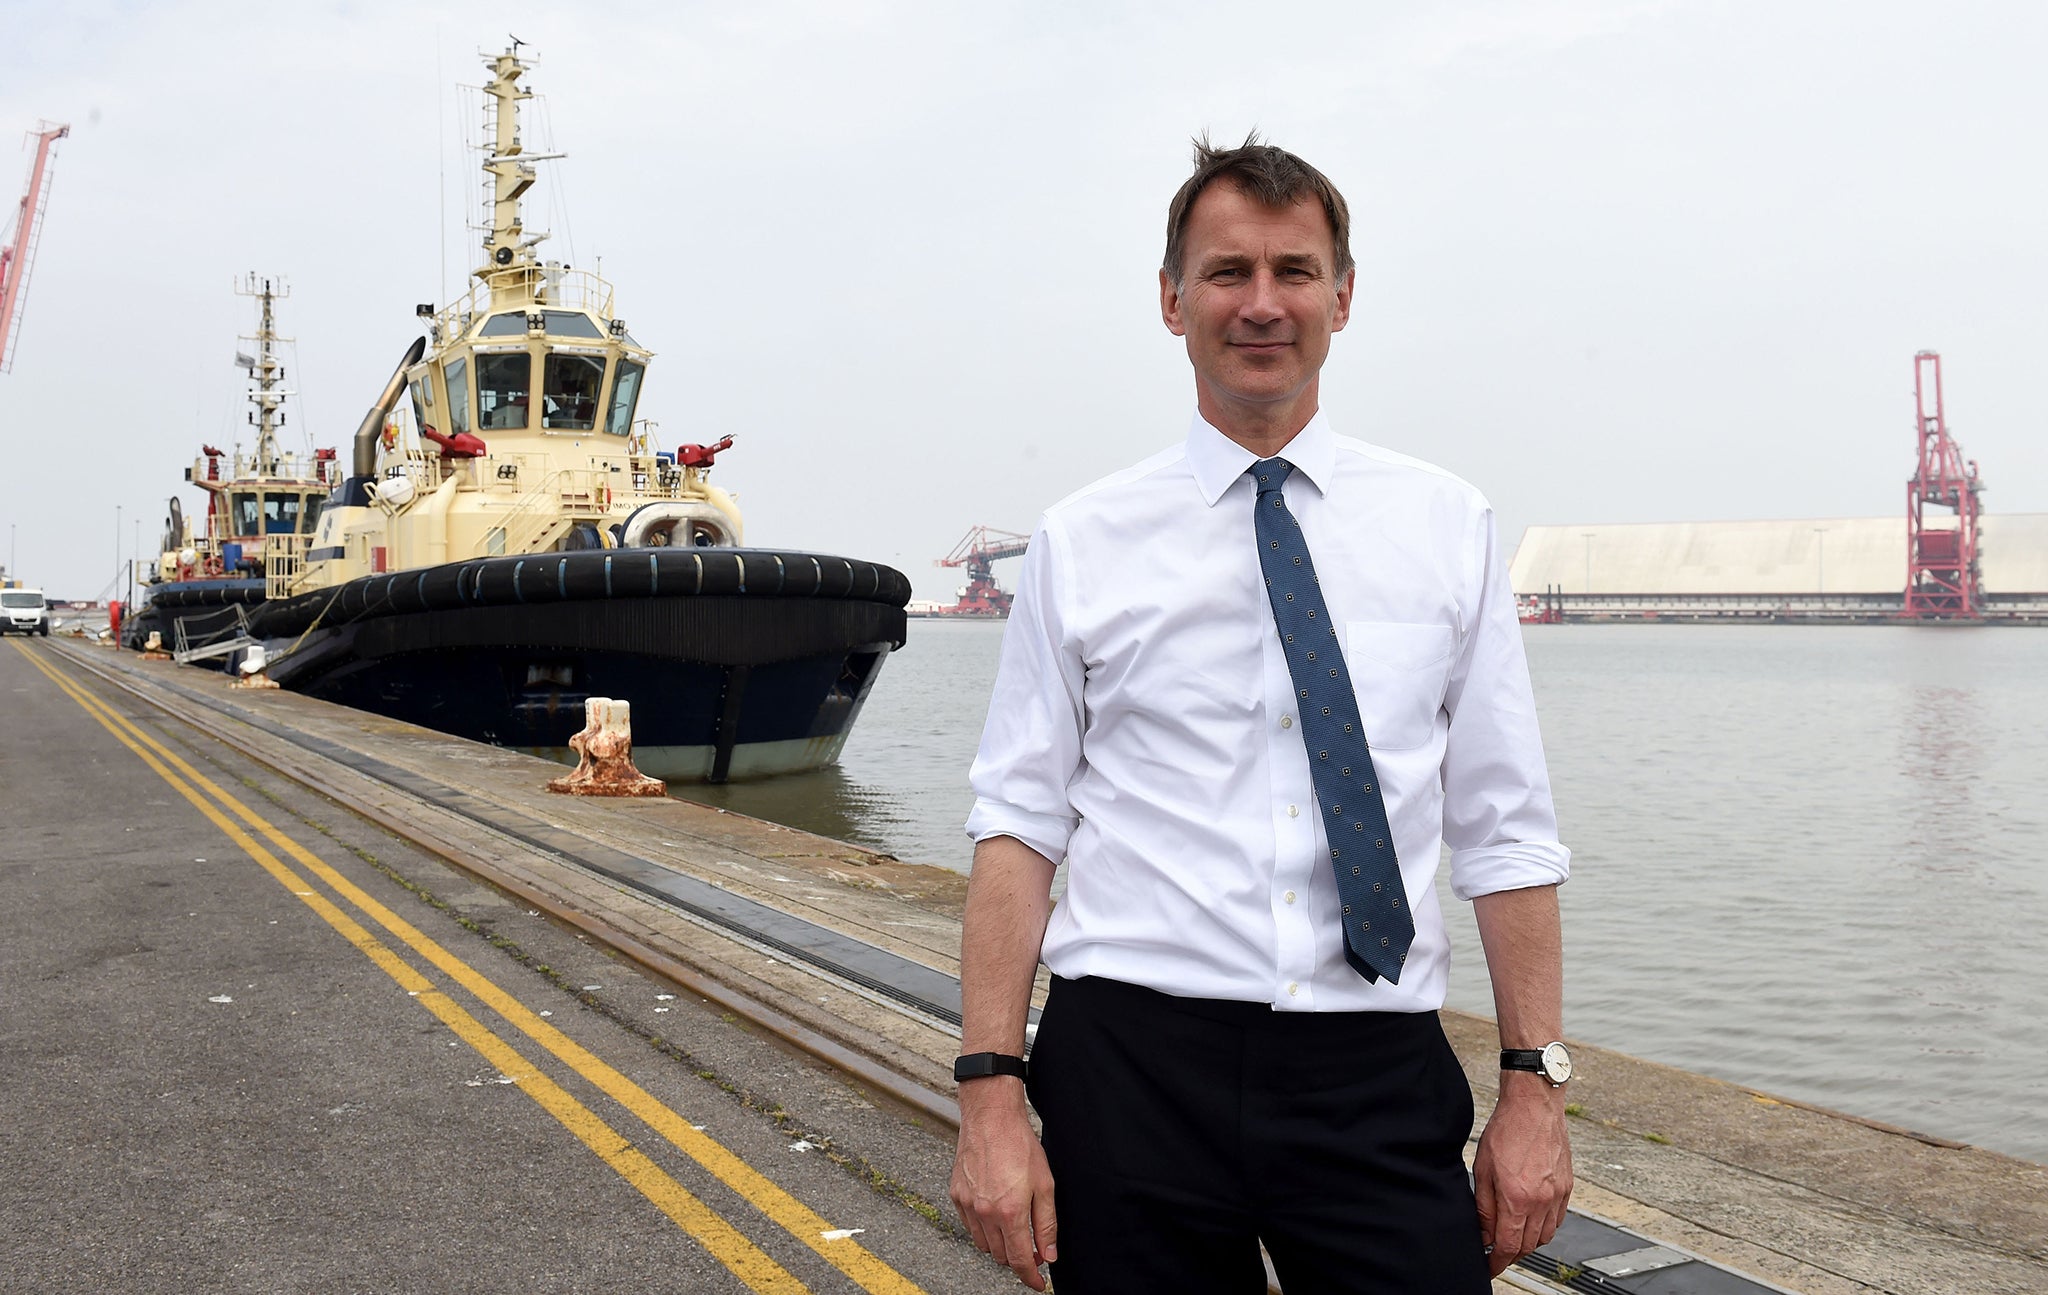 Jeremy Hunt makes a campaign visit to Royal Portbury Dock in Bristol. Was it necessary?